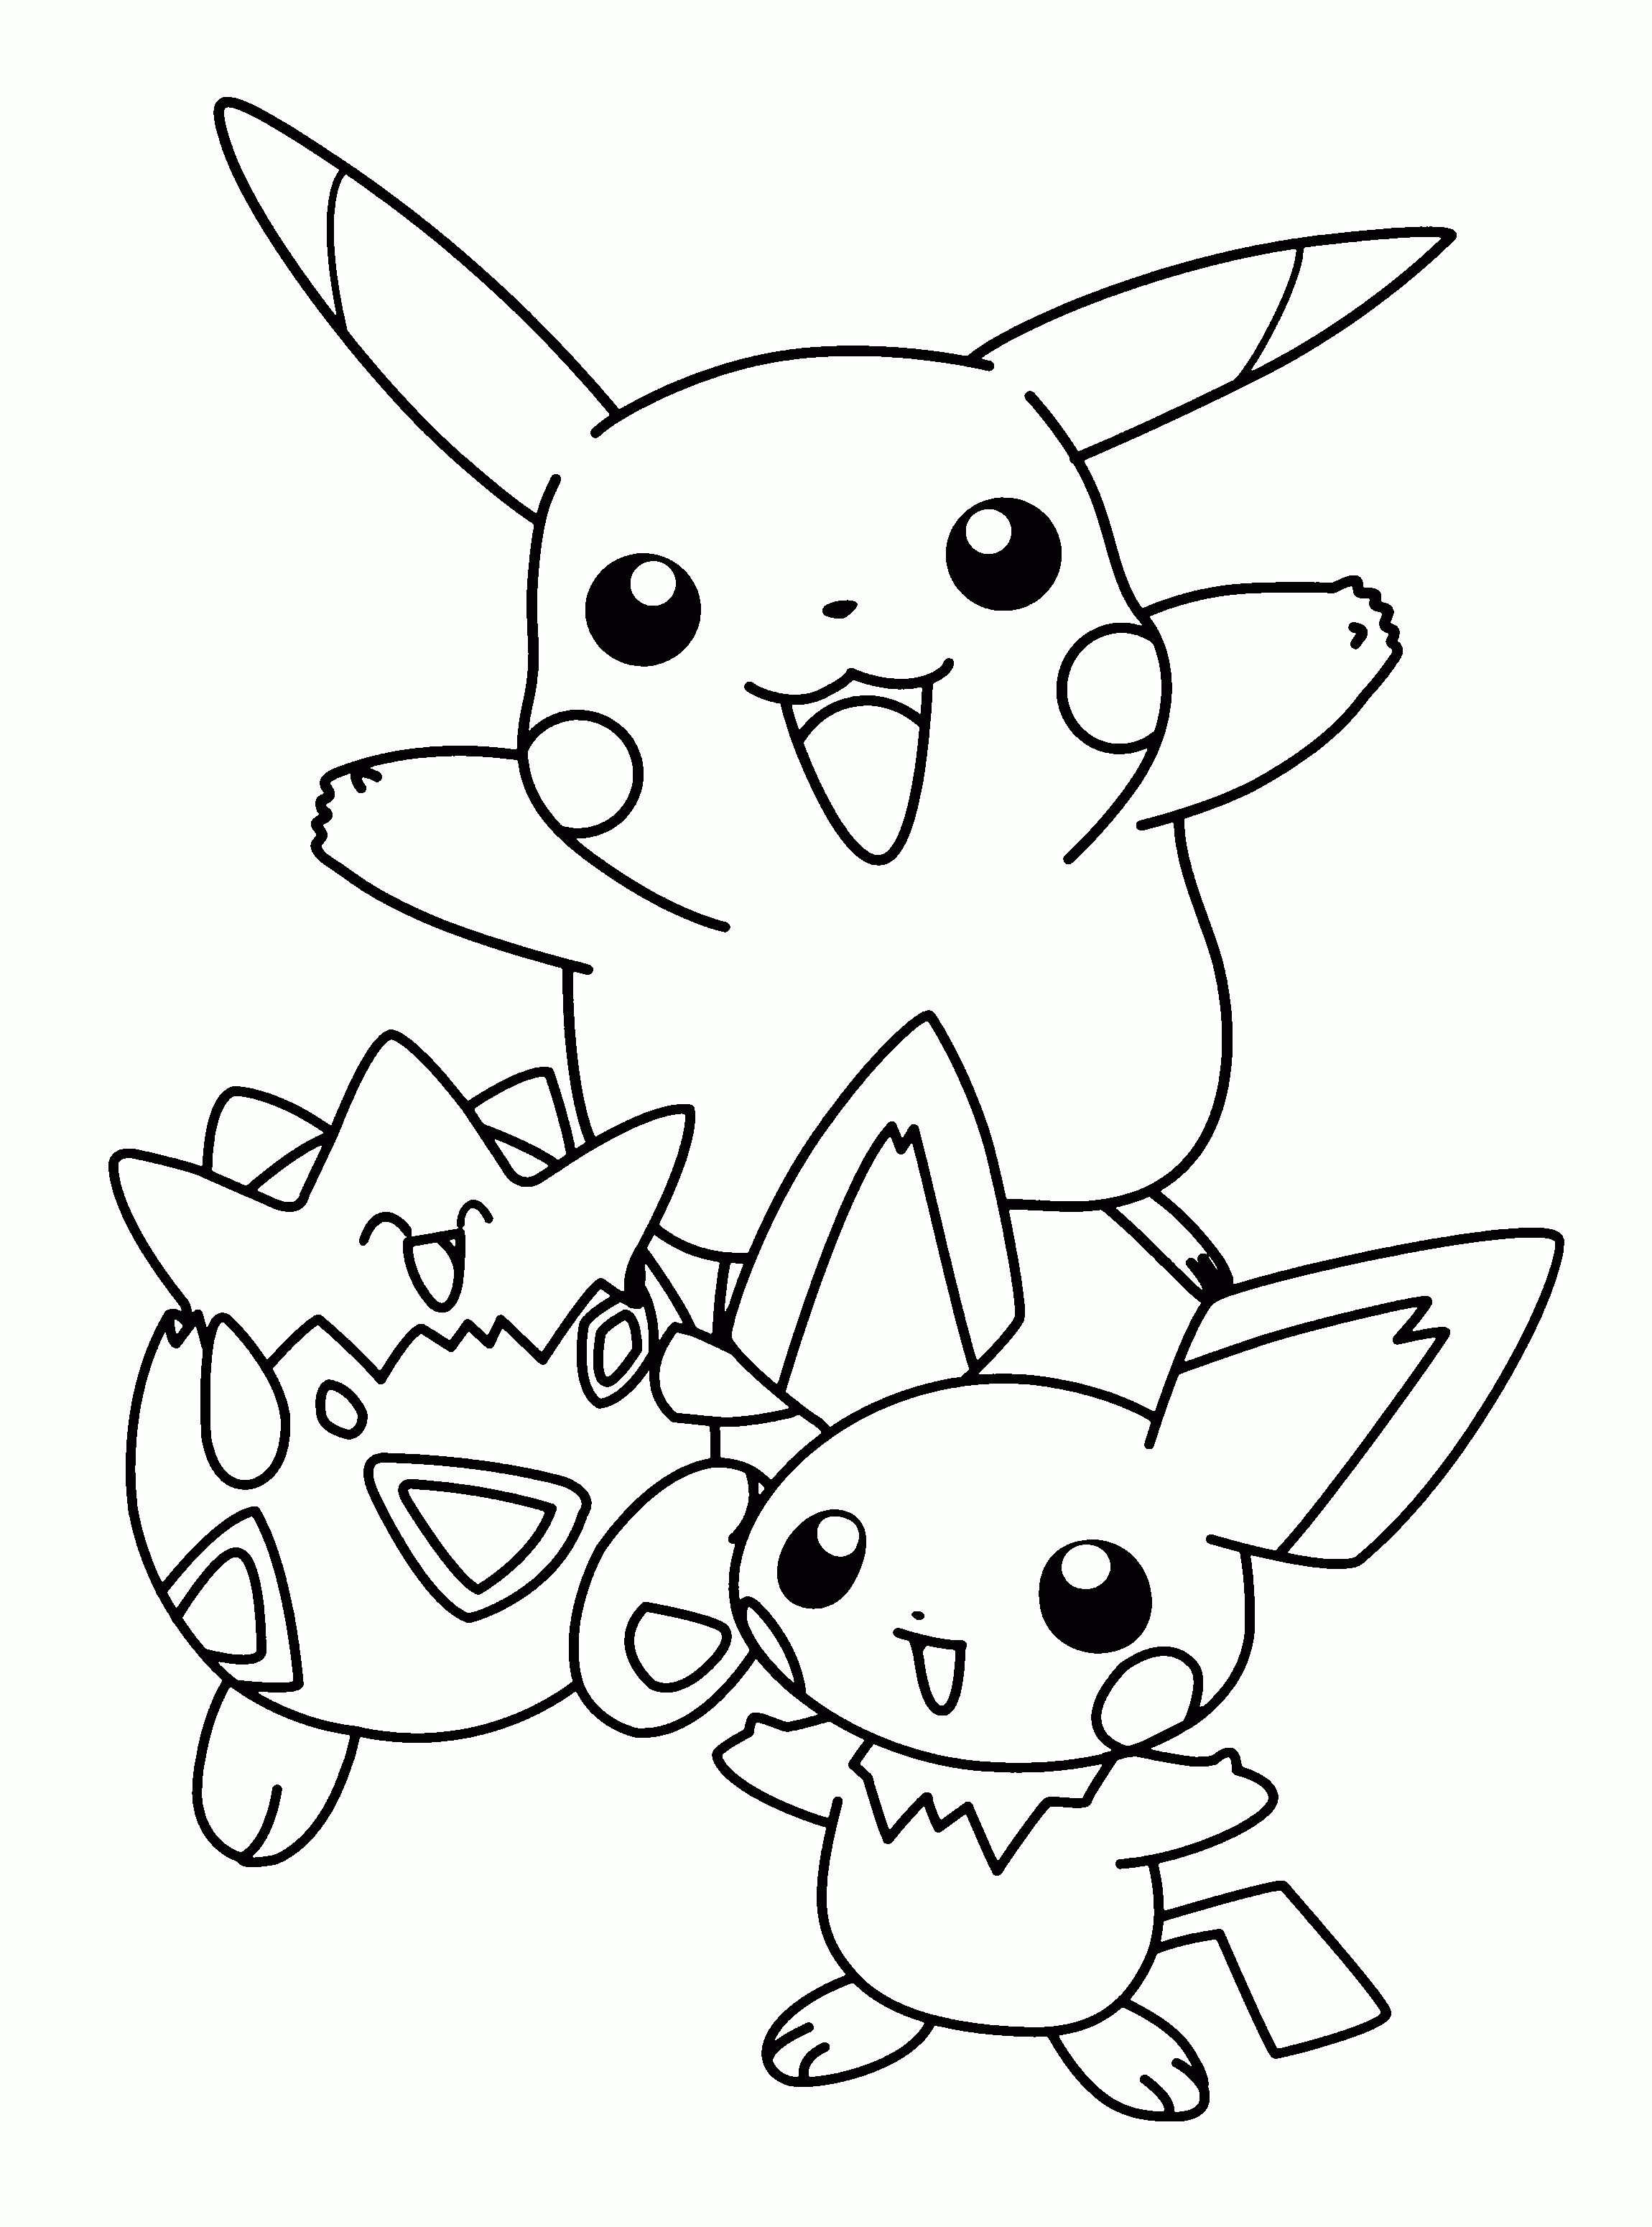 All Pokemon Coloring Pages Download And Print For Free | Cats To - Pokemon Coloring Sheets Free Printable